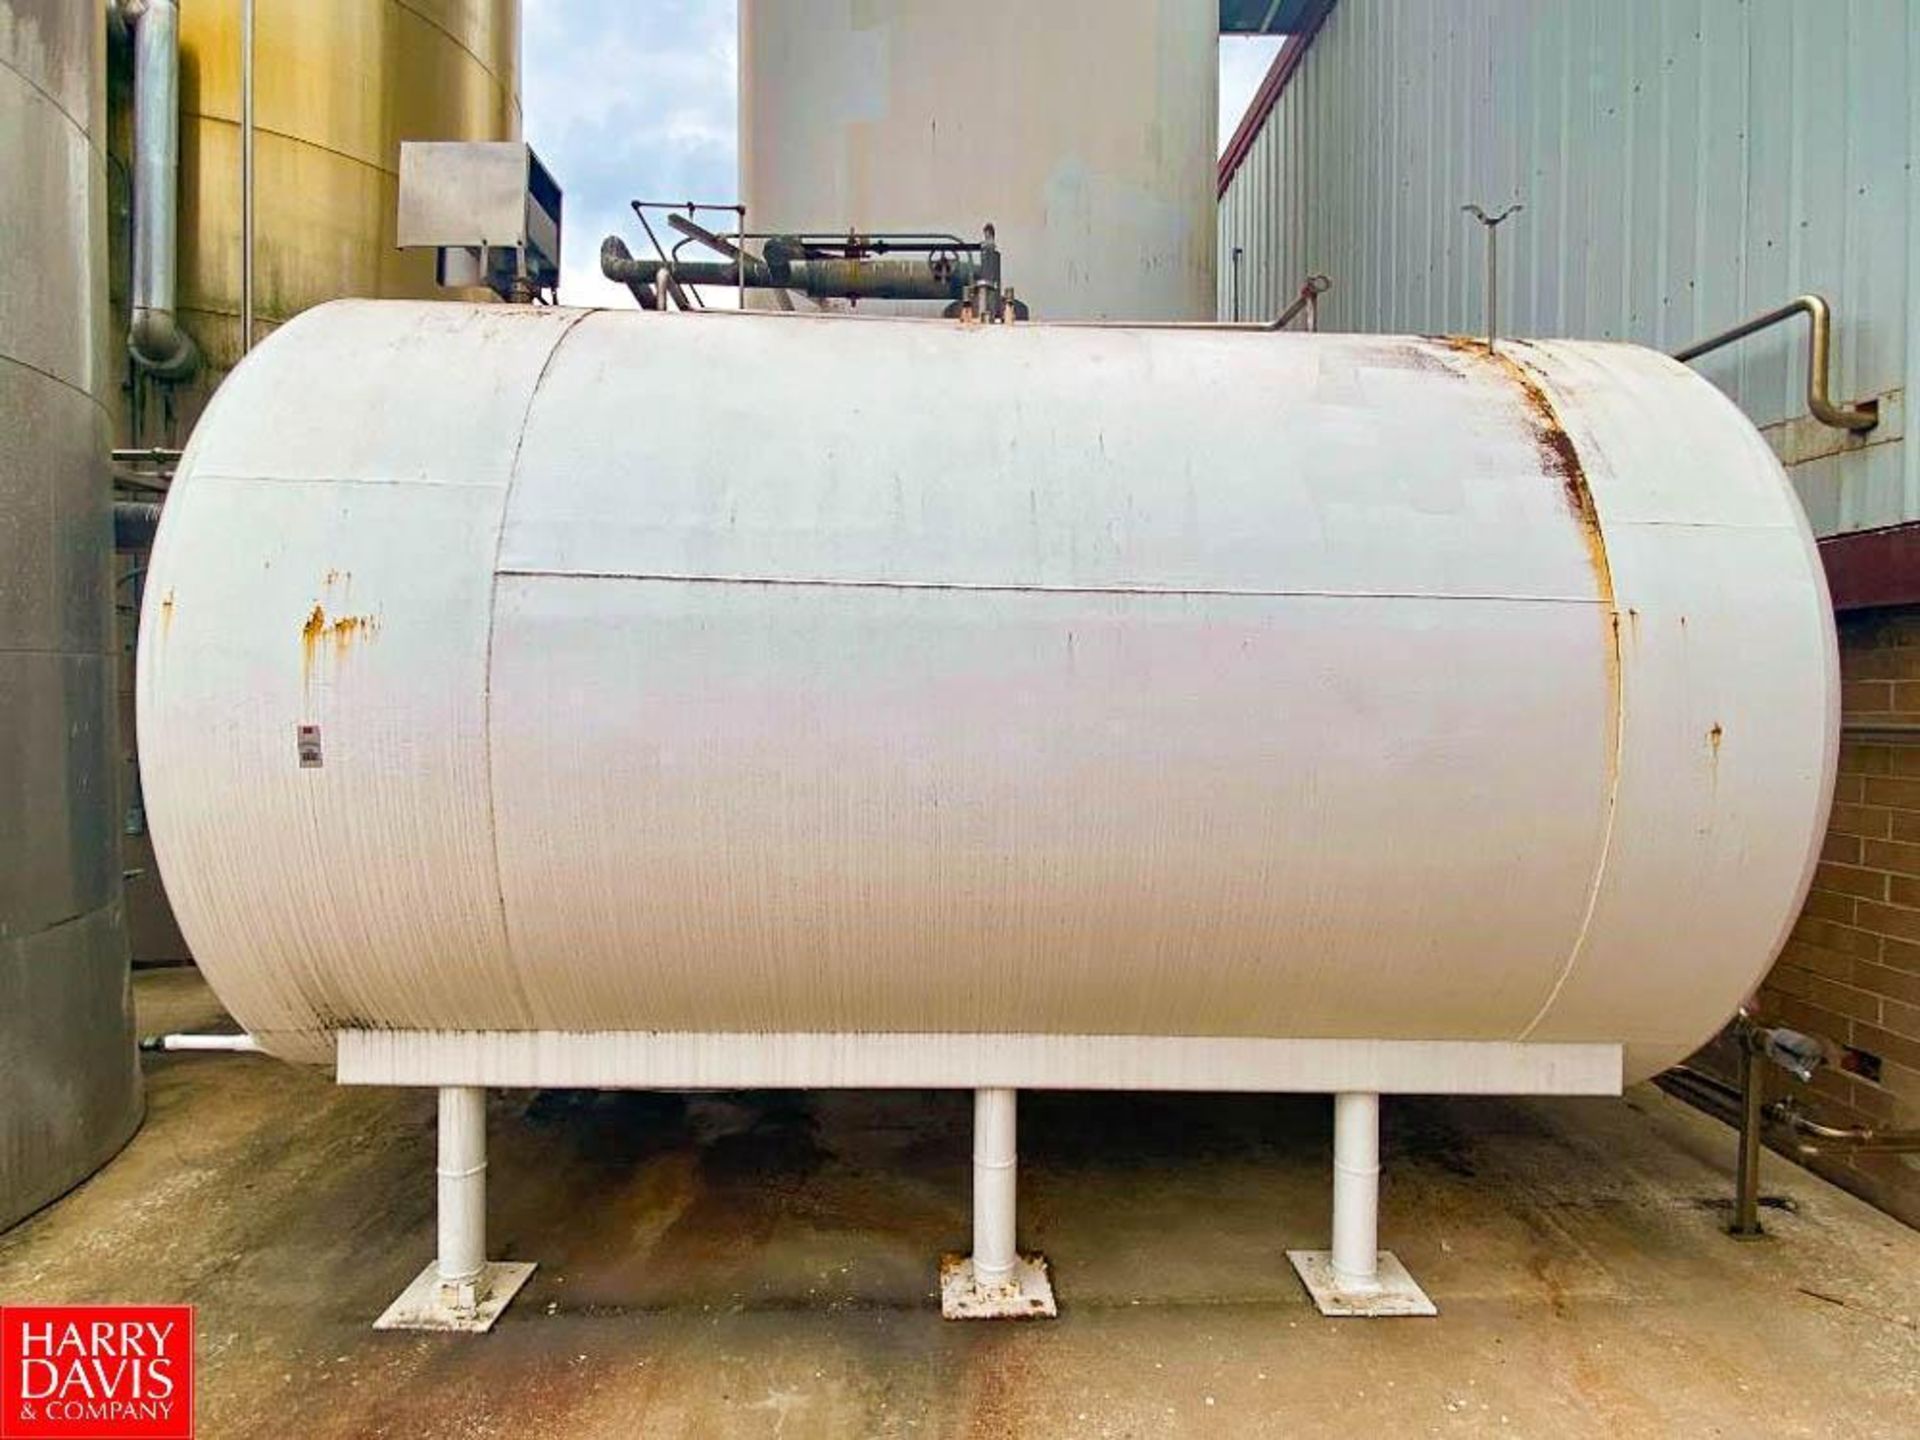 Crepaco 5,000 Gallon Jacketed Horizontal Sucrose S/S Tank with Vertical Agitation, Ball Check Valve